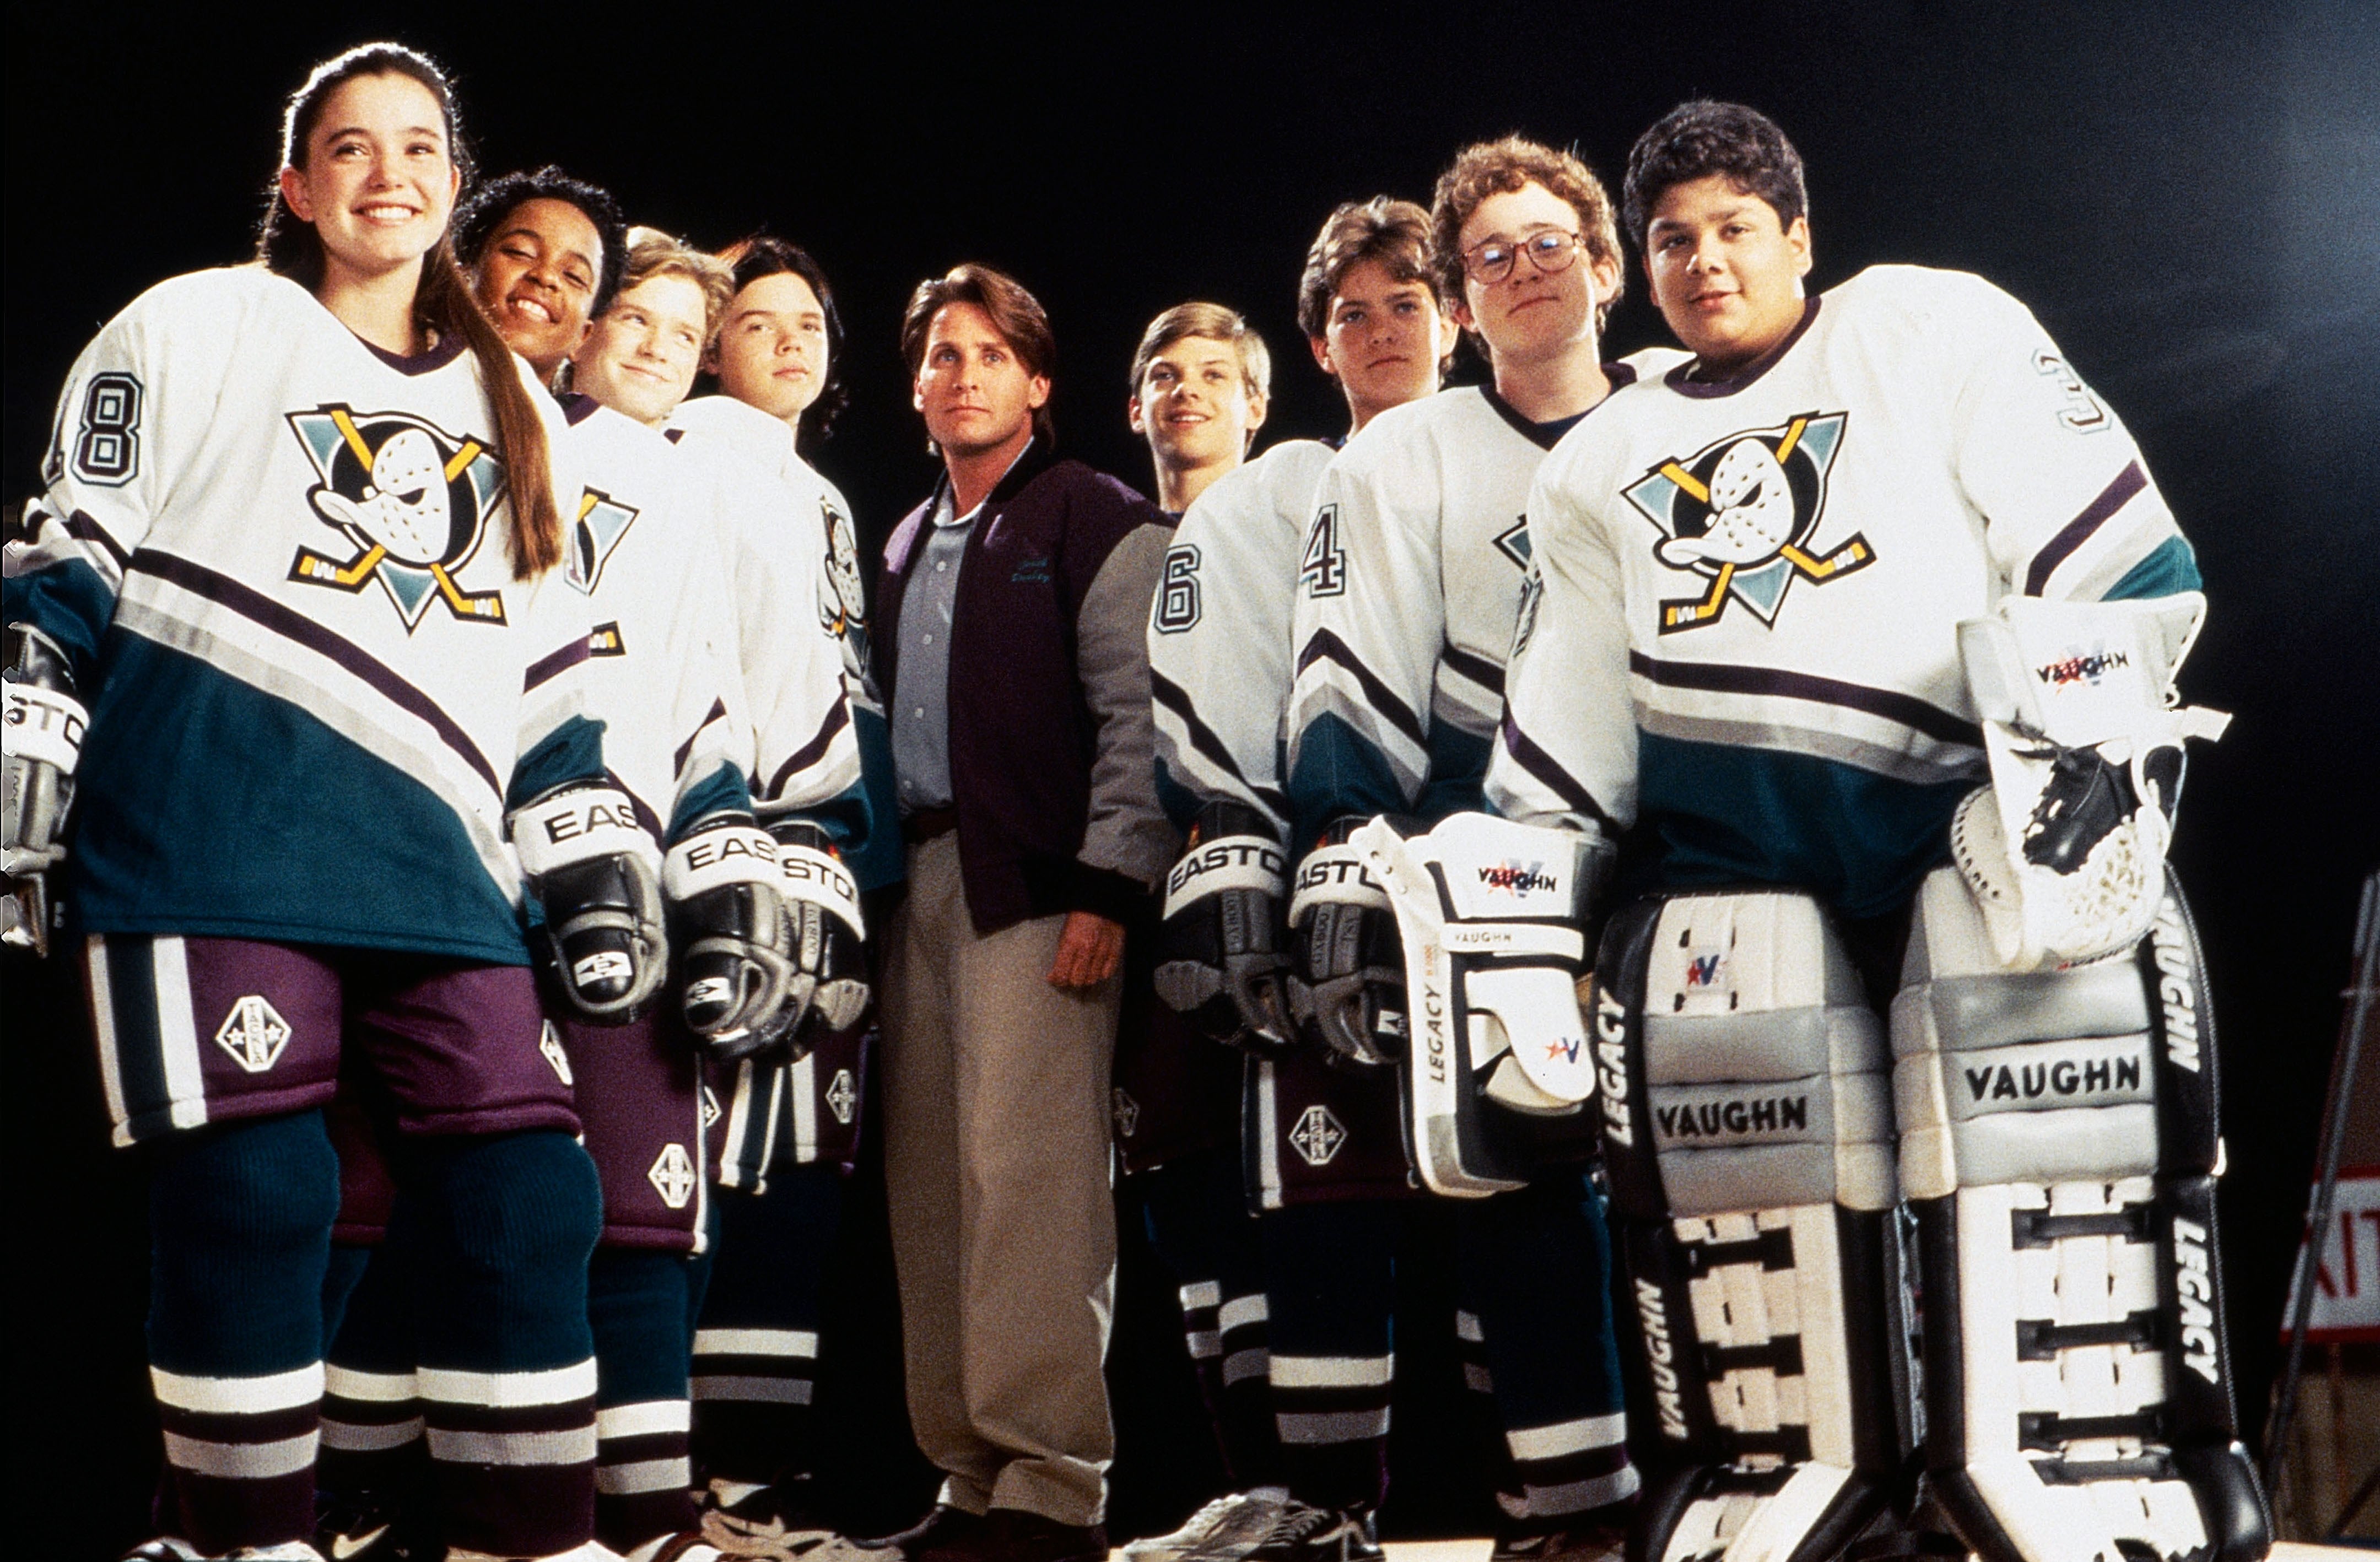 NHL 23 crossover puts The Mighty Ducks from Disney's movie in the